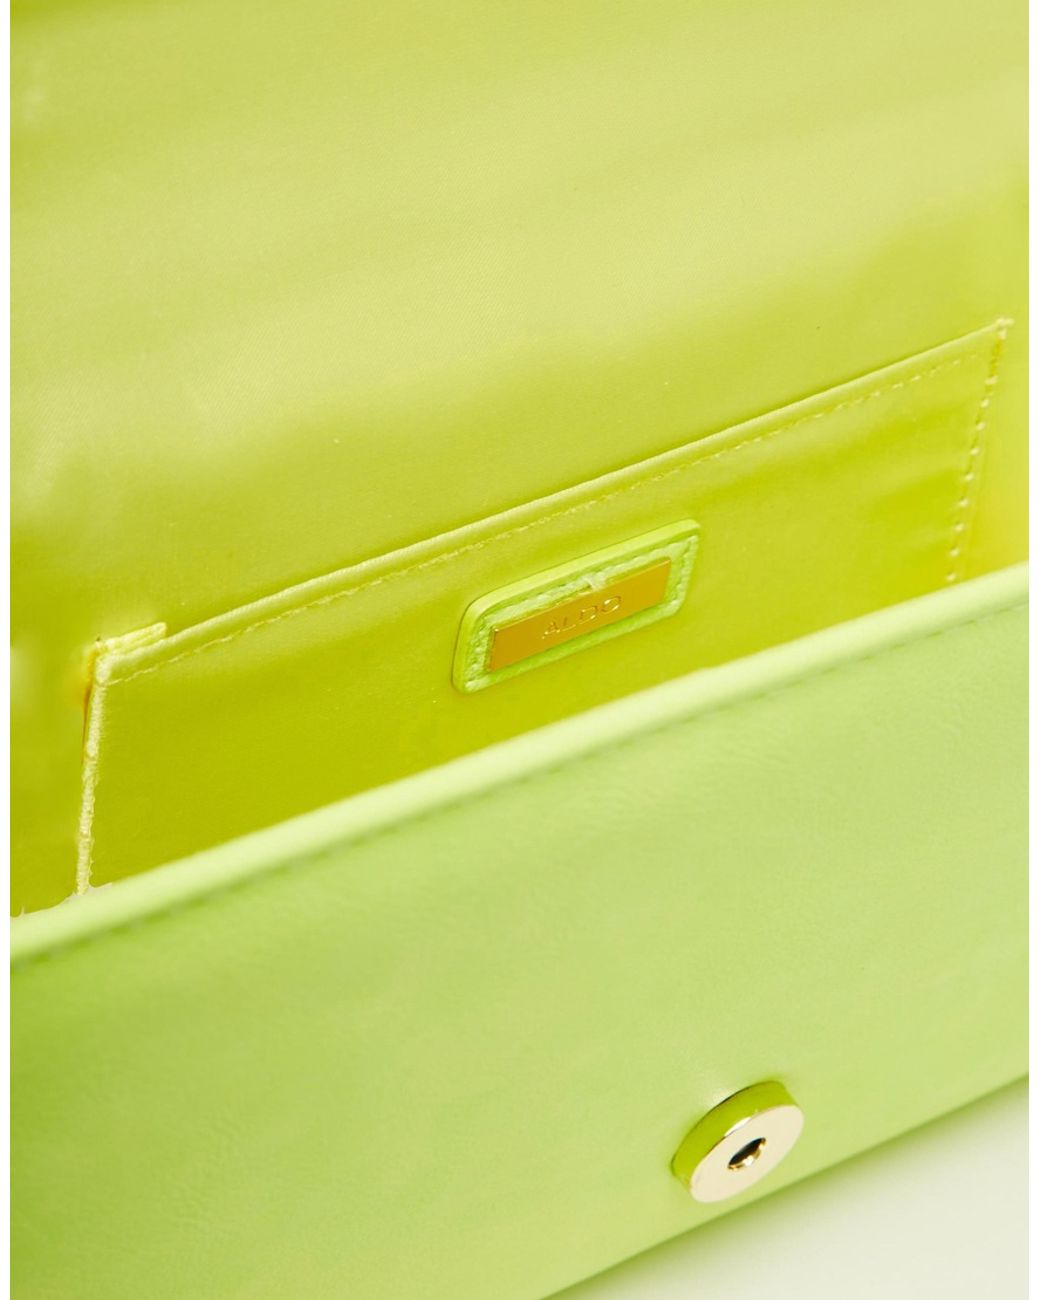 ALDO Ldo Structured Foldover Clutch Bag In Lime Green | Lyst